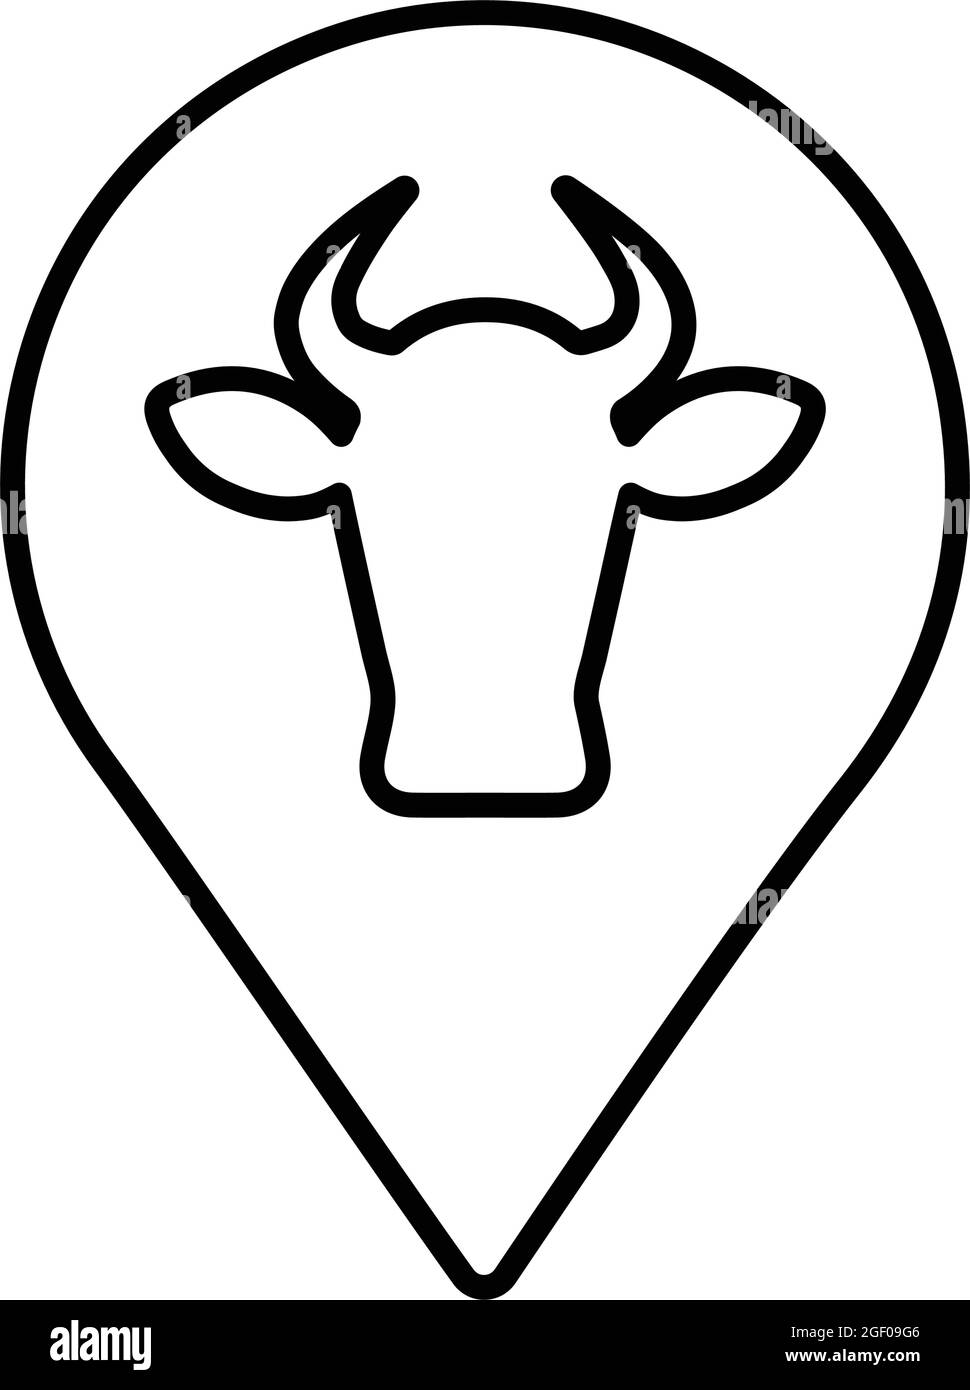 cattle-marker-stock-vector-images-alamy